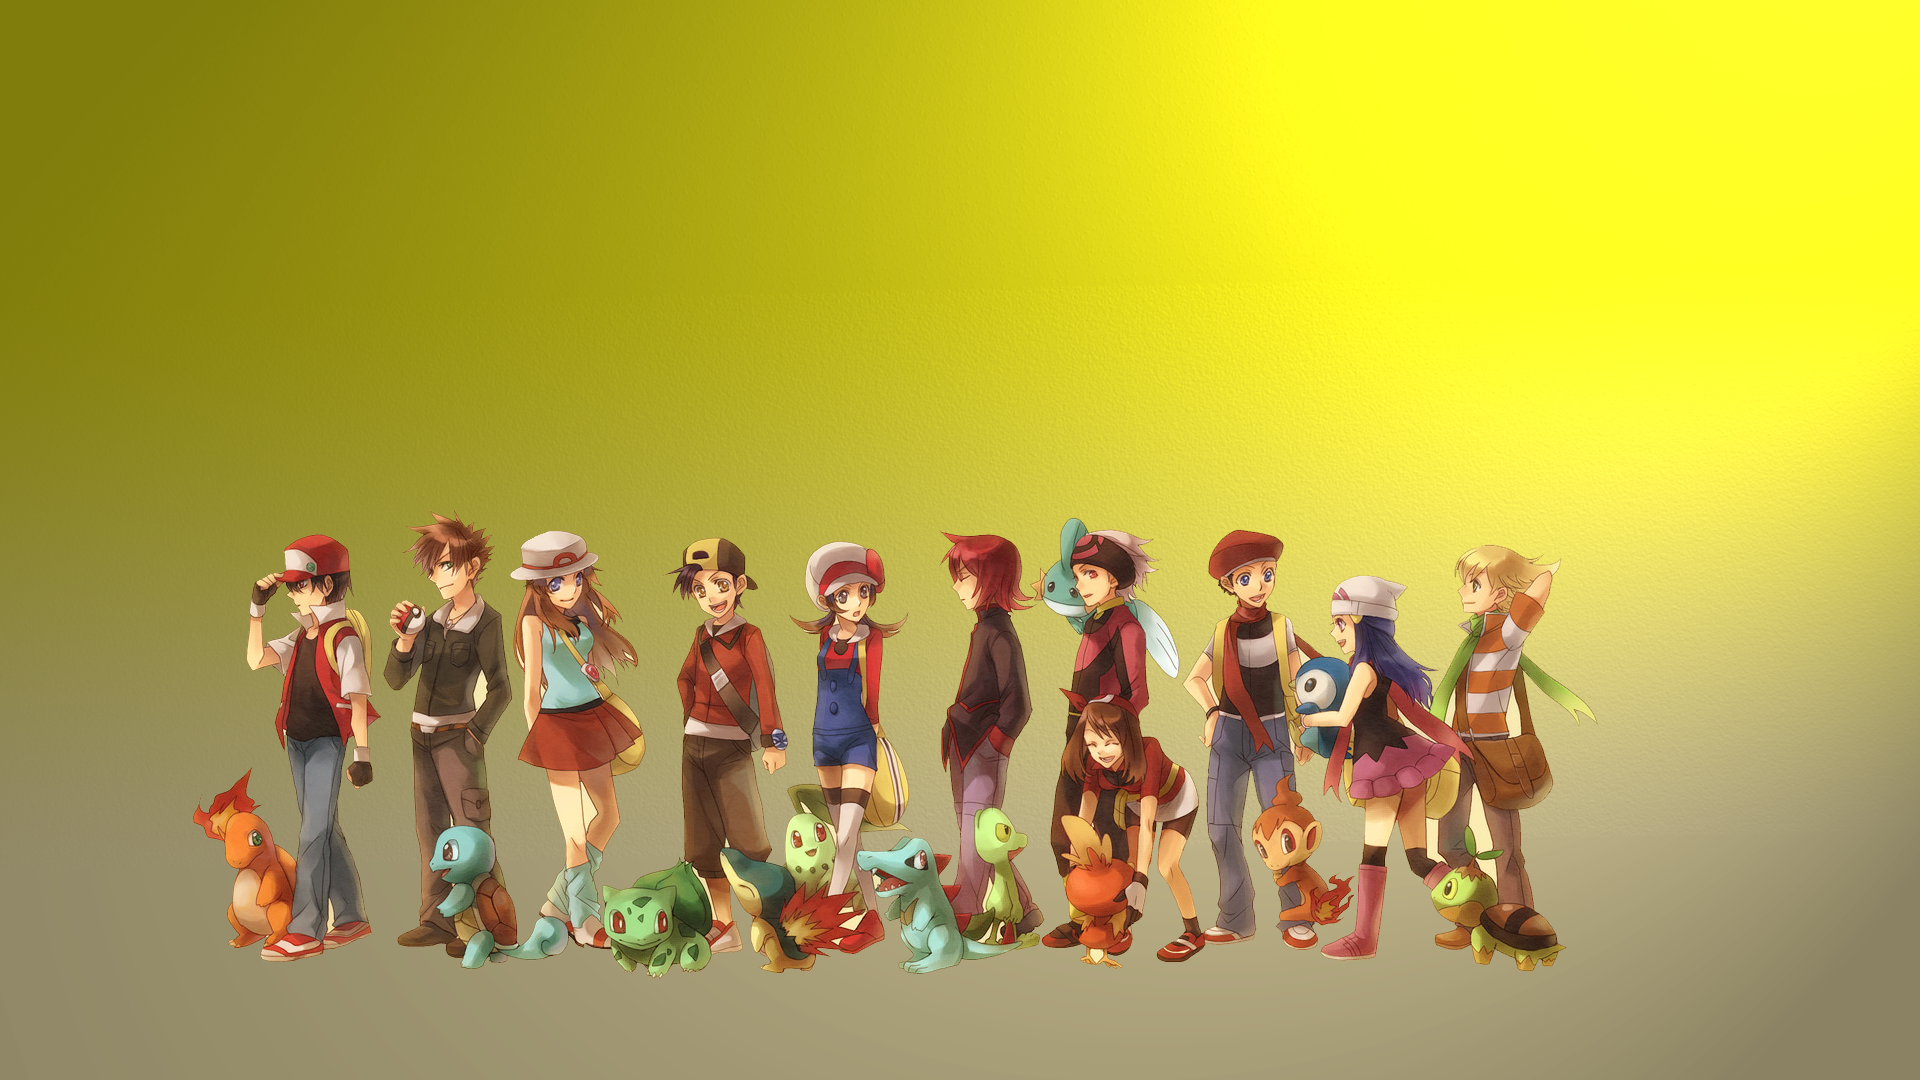 Pokemon Red Character Squirtle Bulbasaur Cyndaquil Chikorita Totodile Treecko Chimchar Torchic Piplu 1920x1080